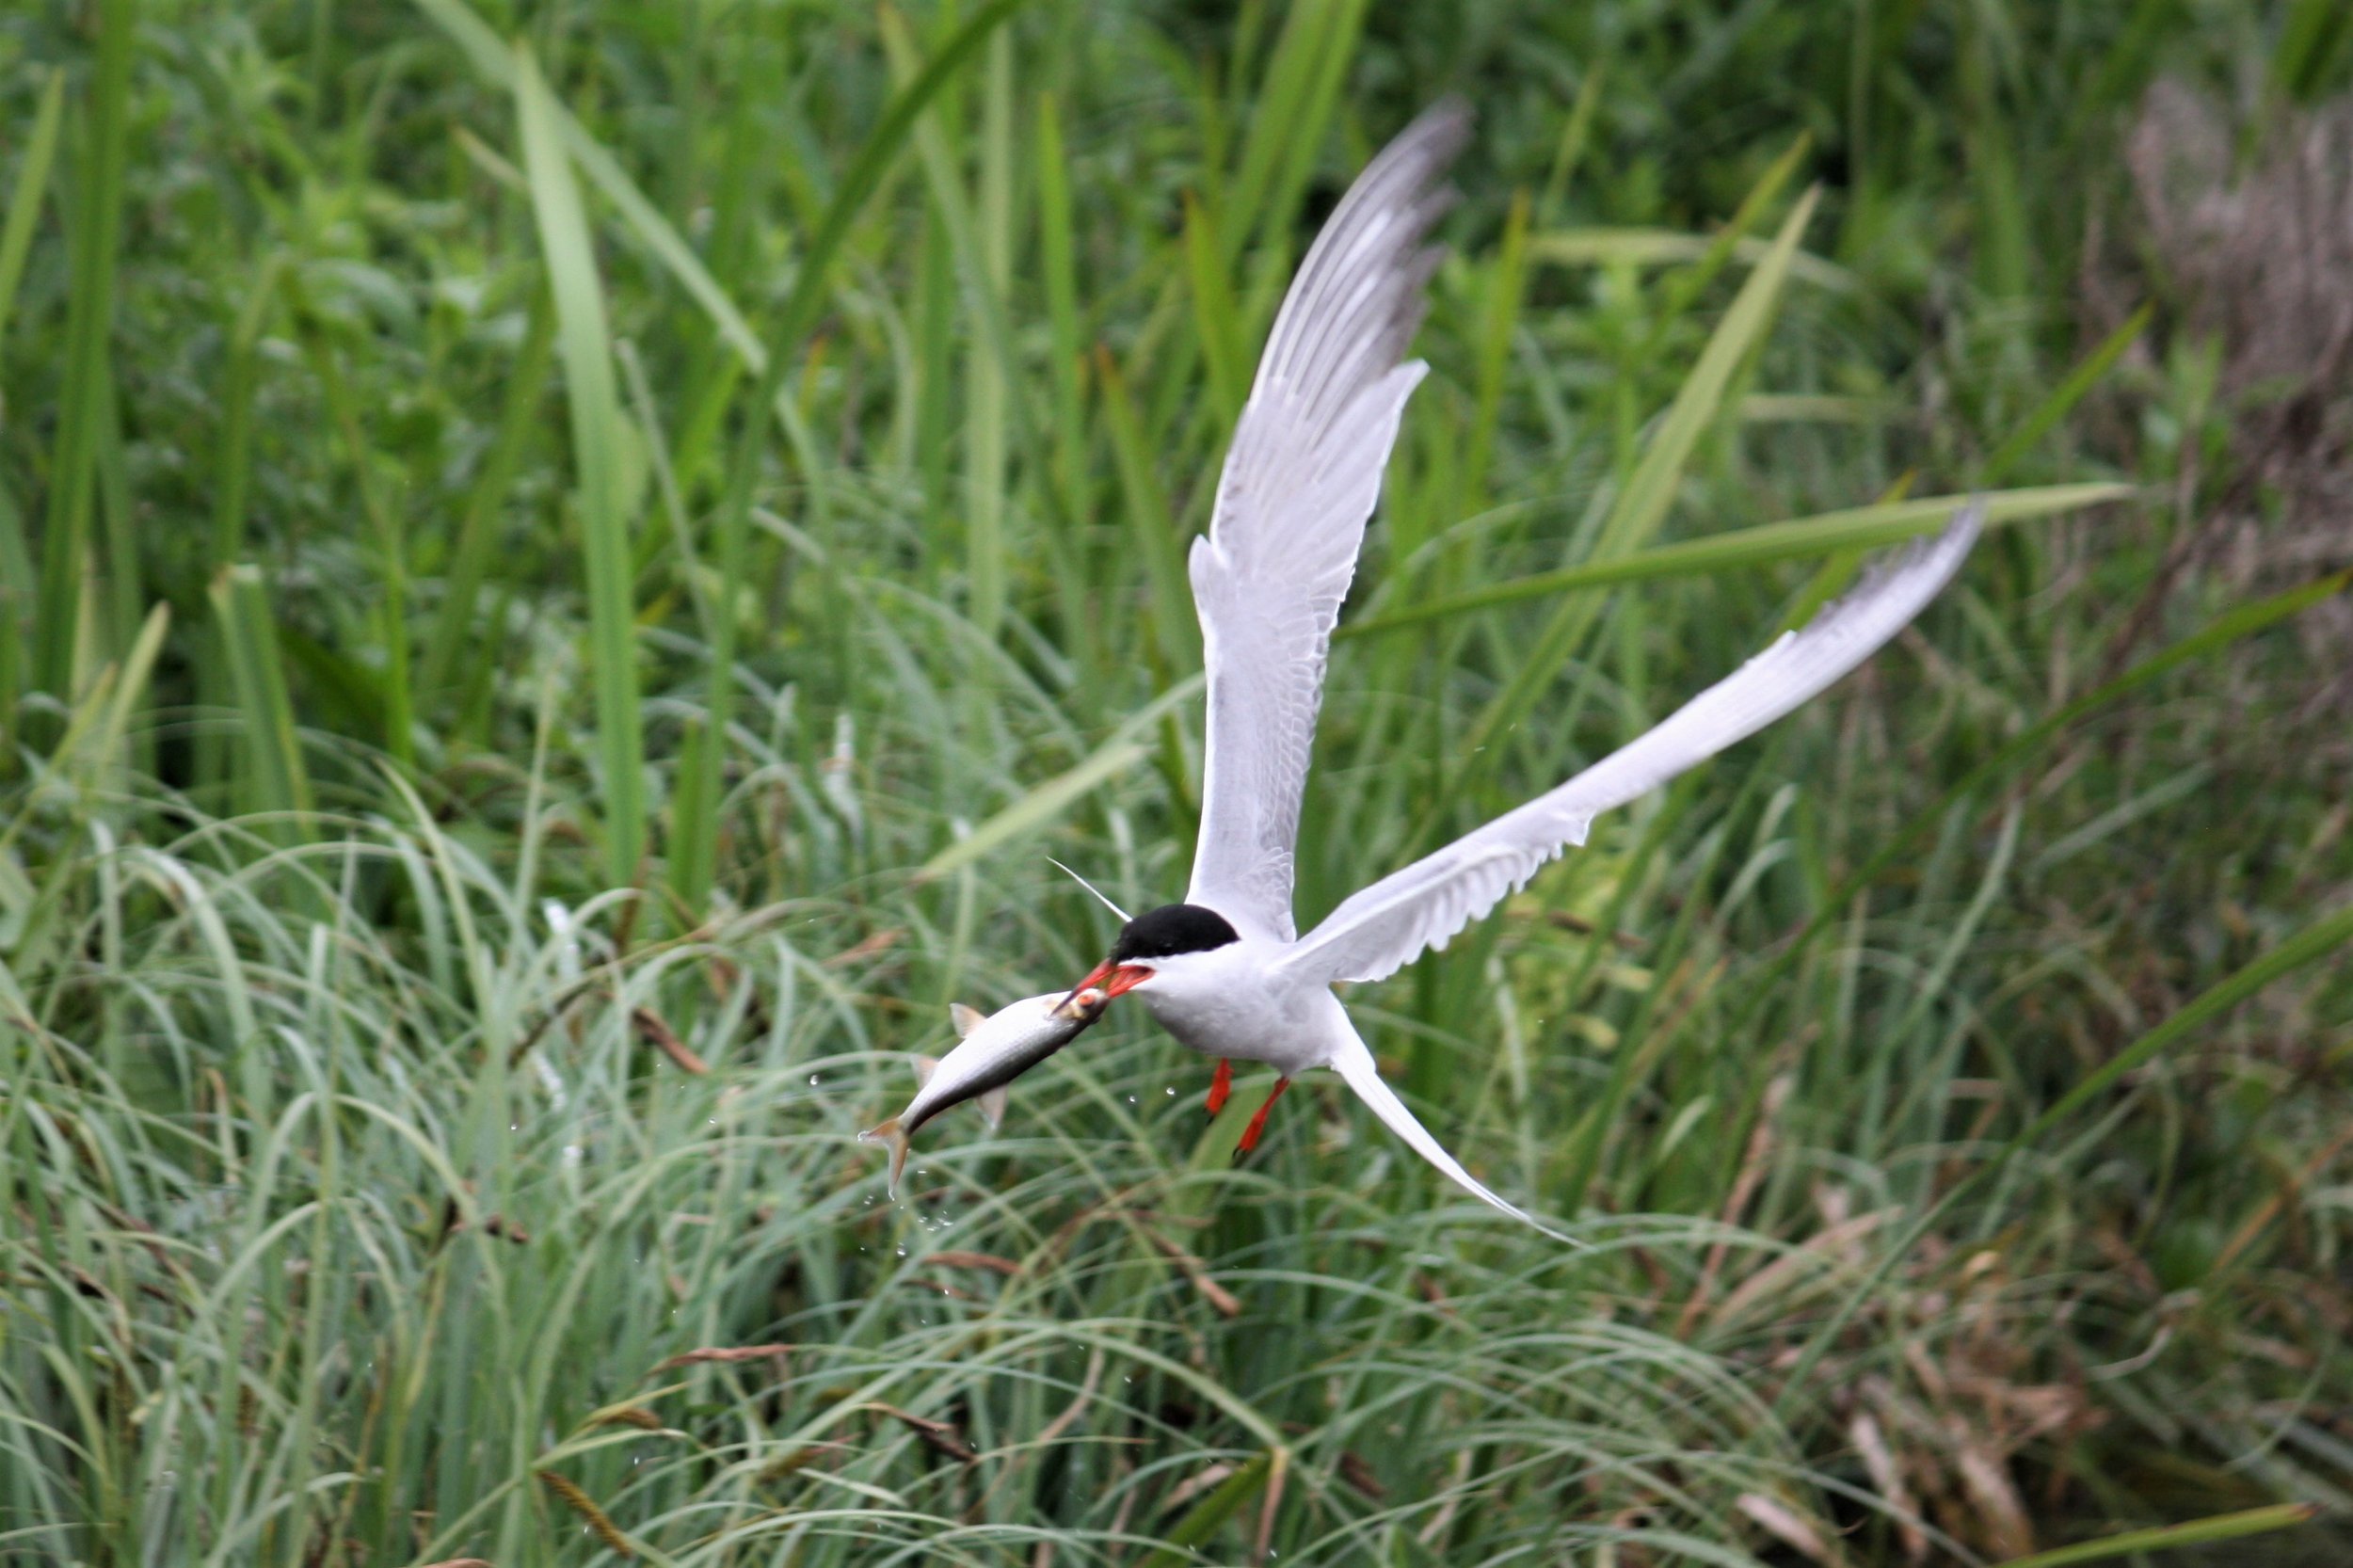  Tern after catching a fish on the Chesterfield canal 